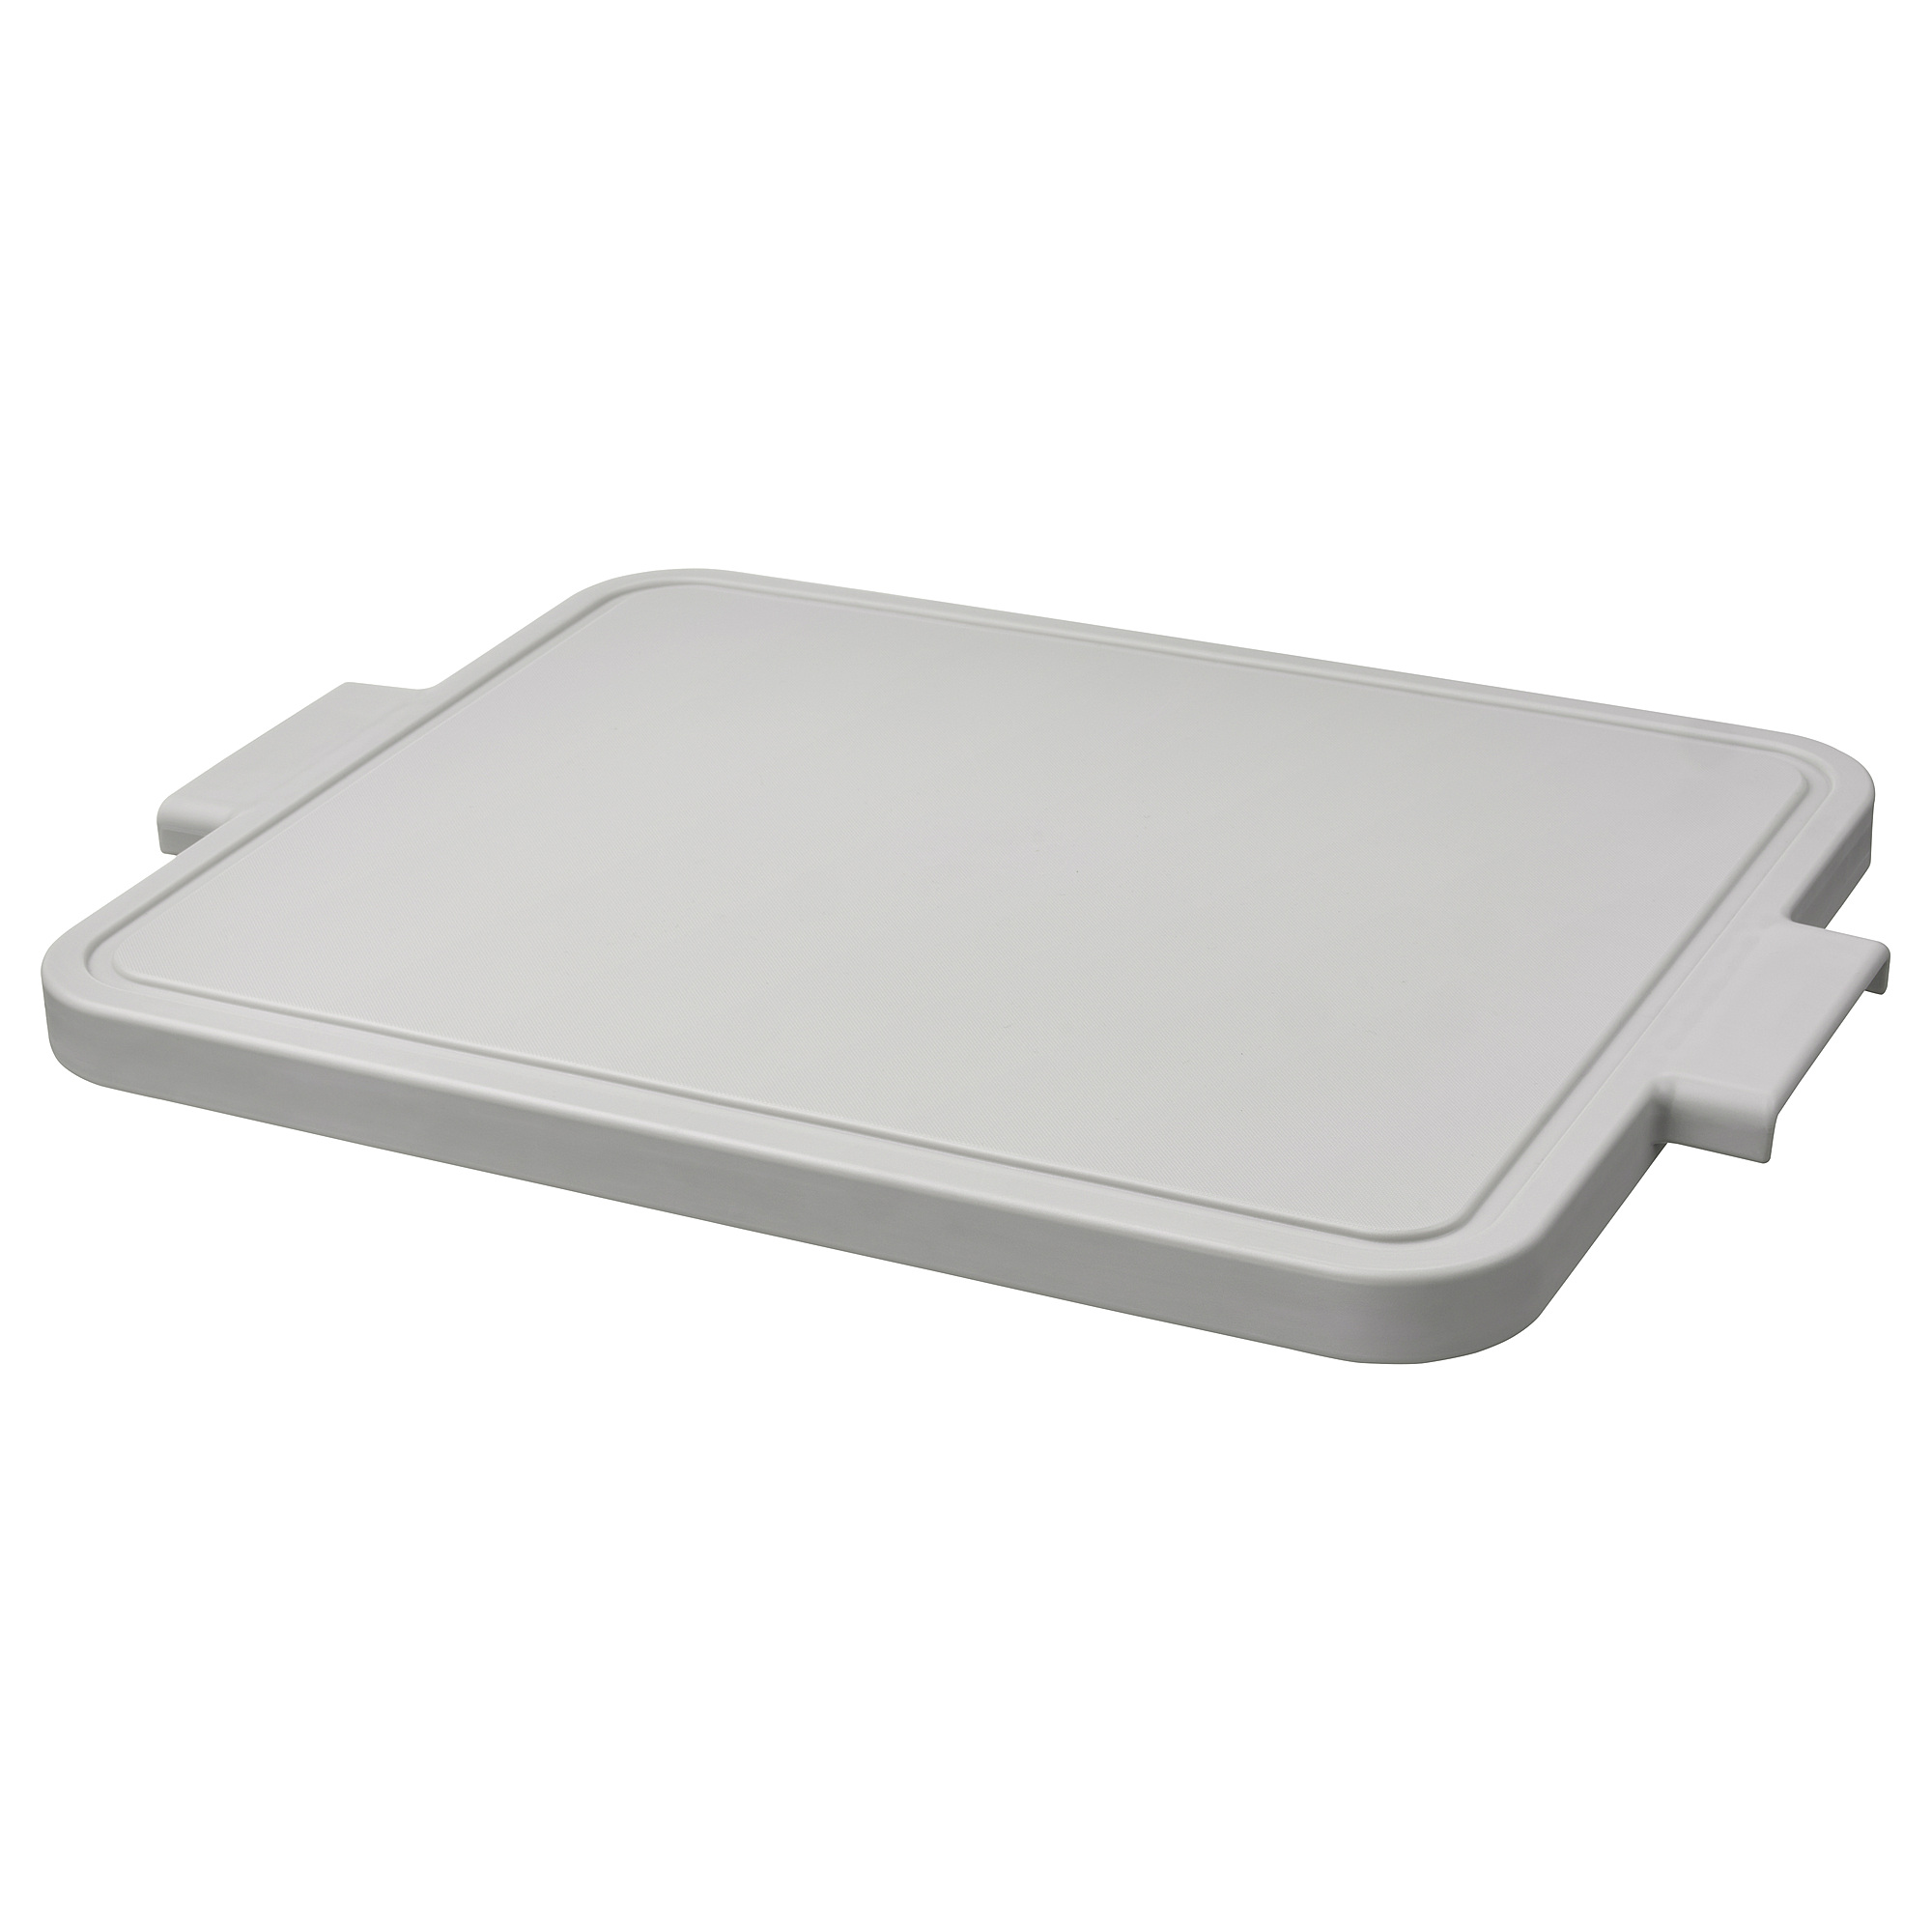 LILLHAVET chopping board